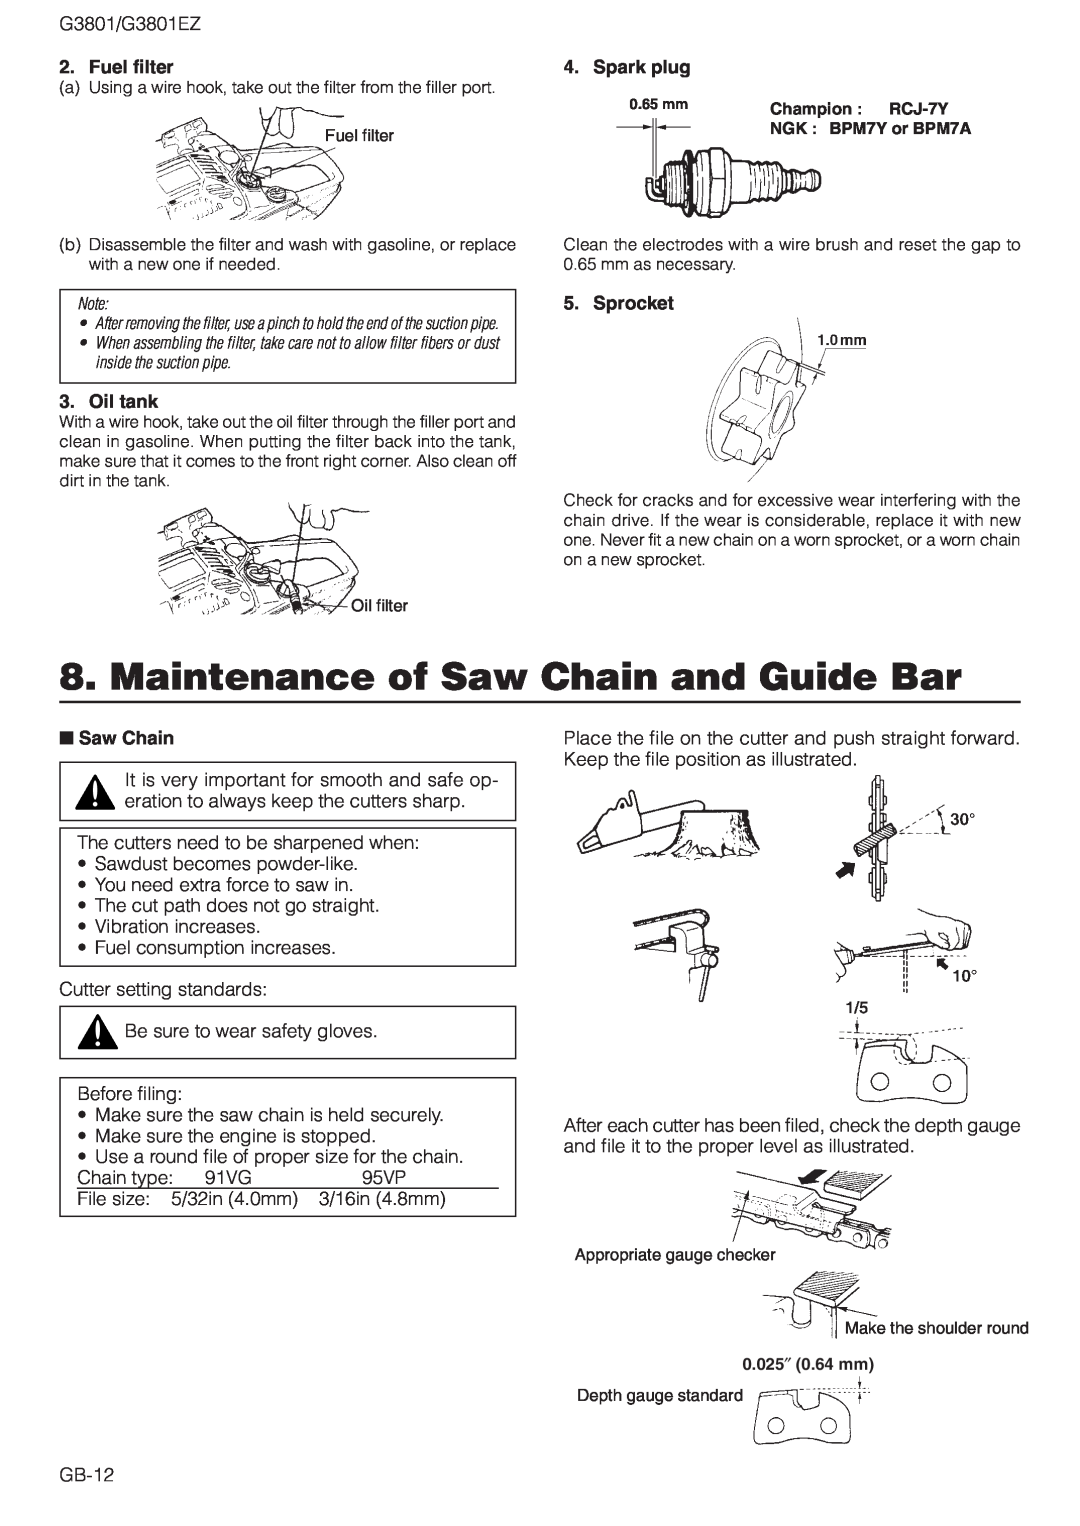 Zenoah owner manual Maintenance of Saw Chain and Guide Bar, G3801/G3801EZ, Fuel filter, Spark plug, Oil tank, Sprocket 